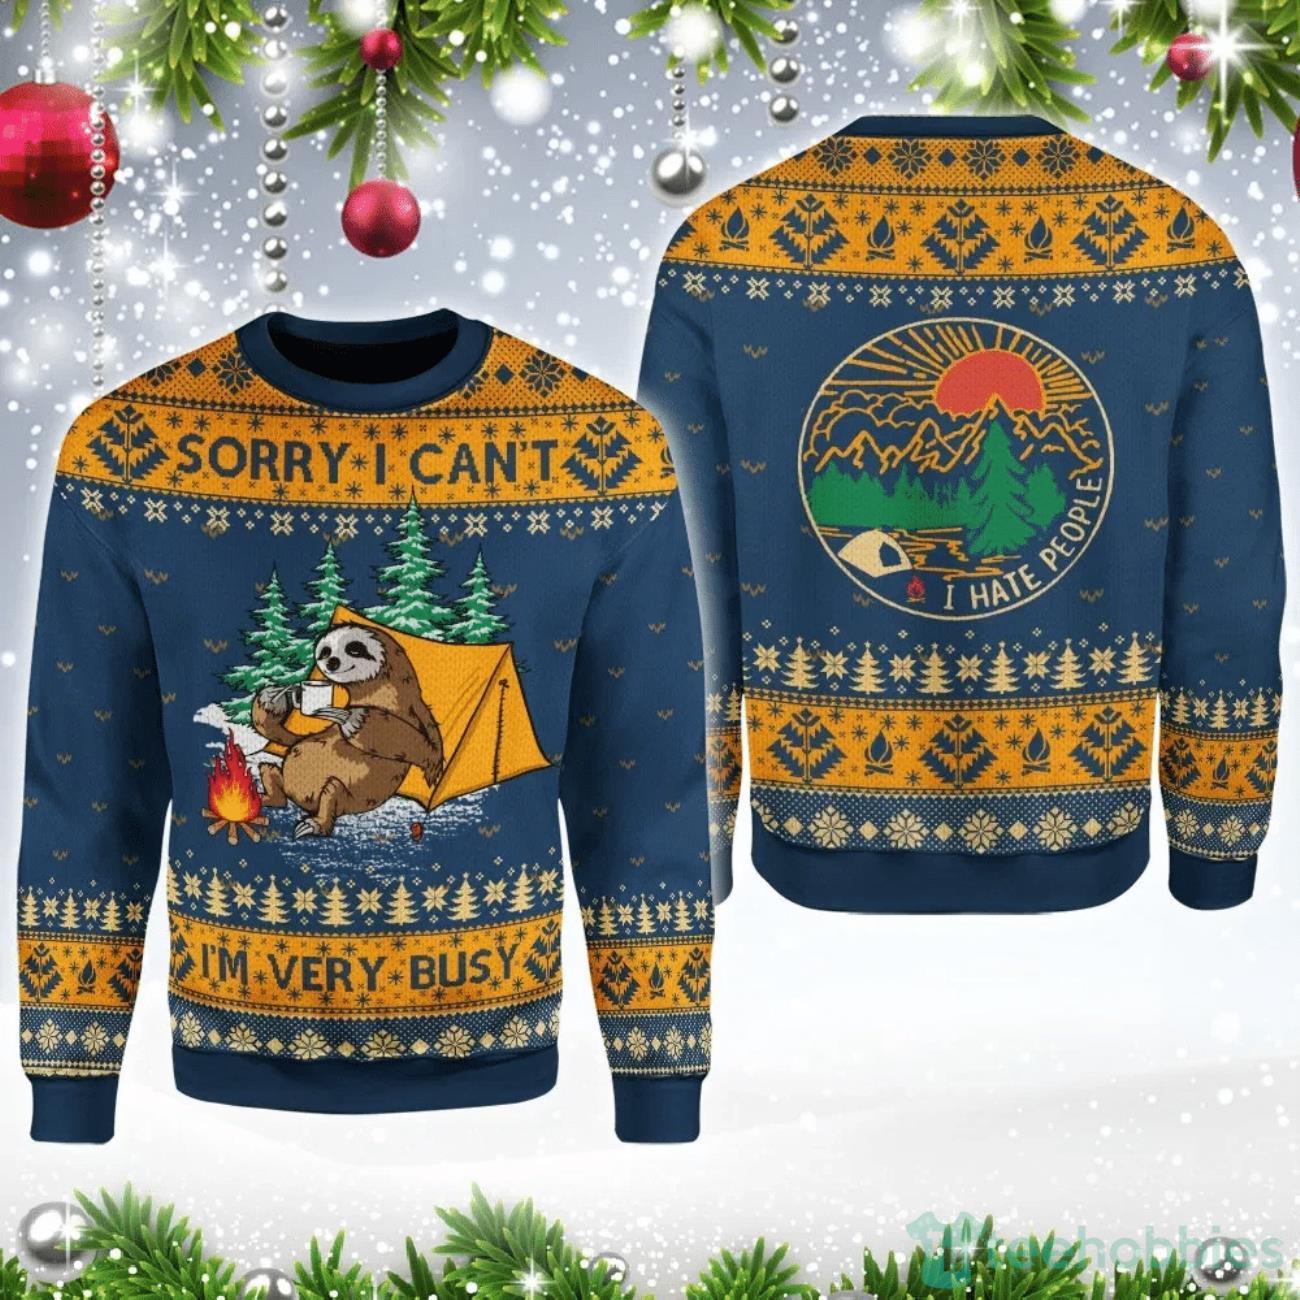 Sorry I Canâ€™t Iâ€™m Very Busy Sloth Ugly Sweater For Christmas Product Photo 1